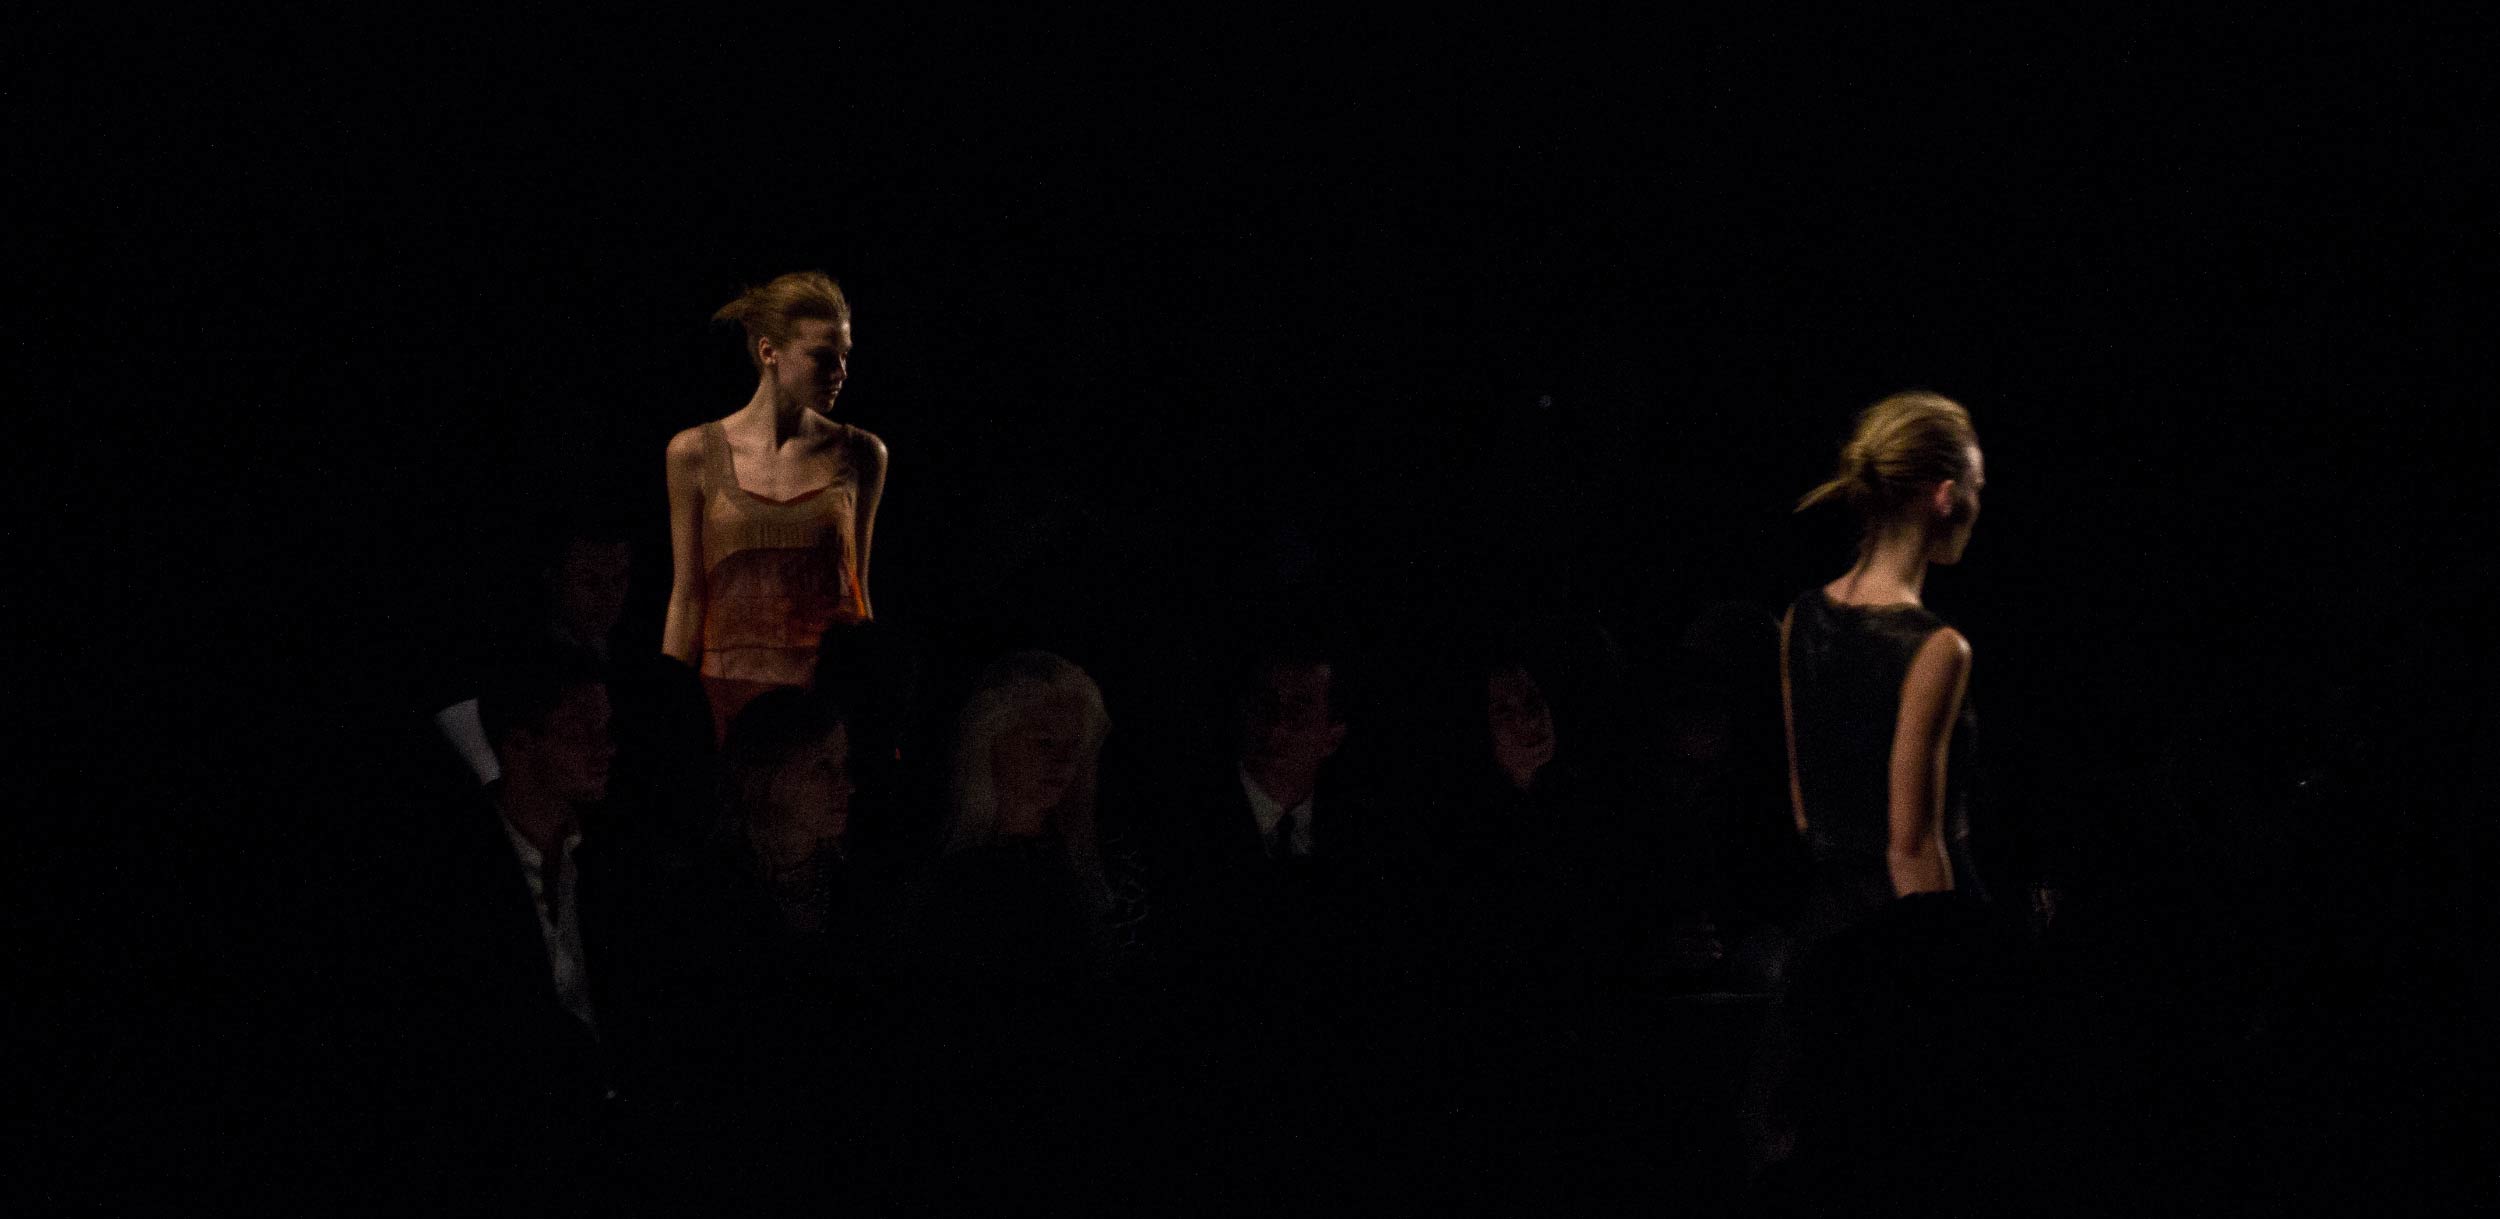 A still frame from David and Danny roberts of igorandandre short film from Narciso Rodriguez Fall 2011 fashion show